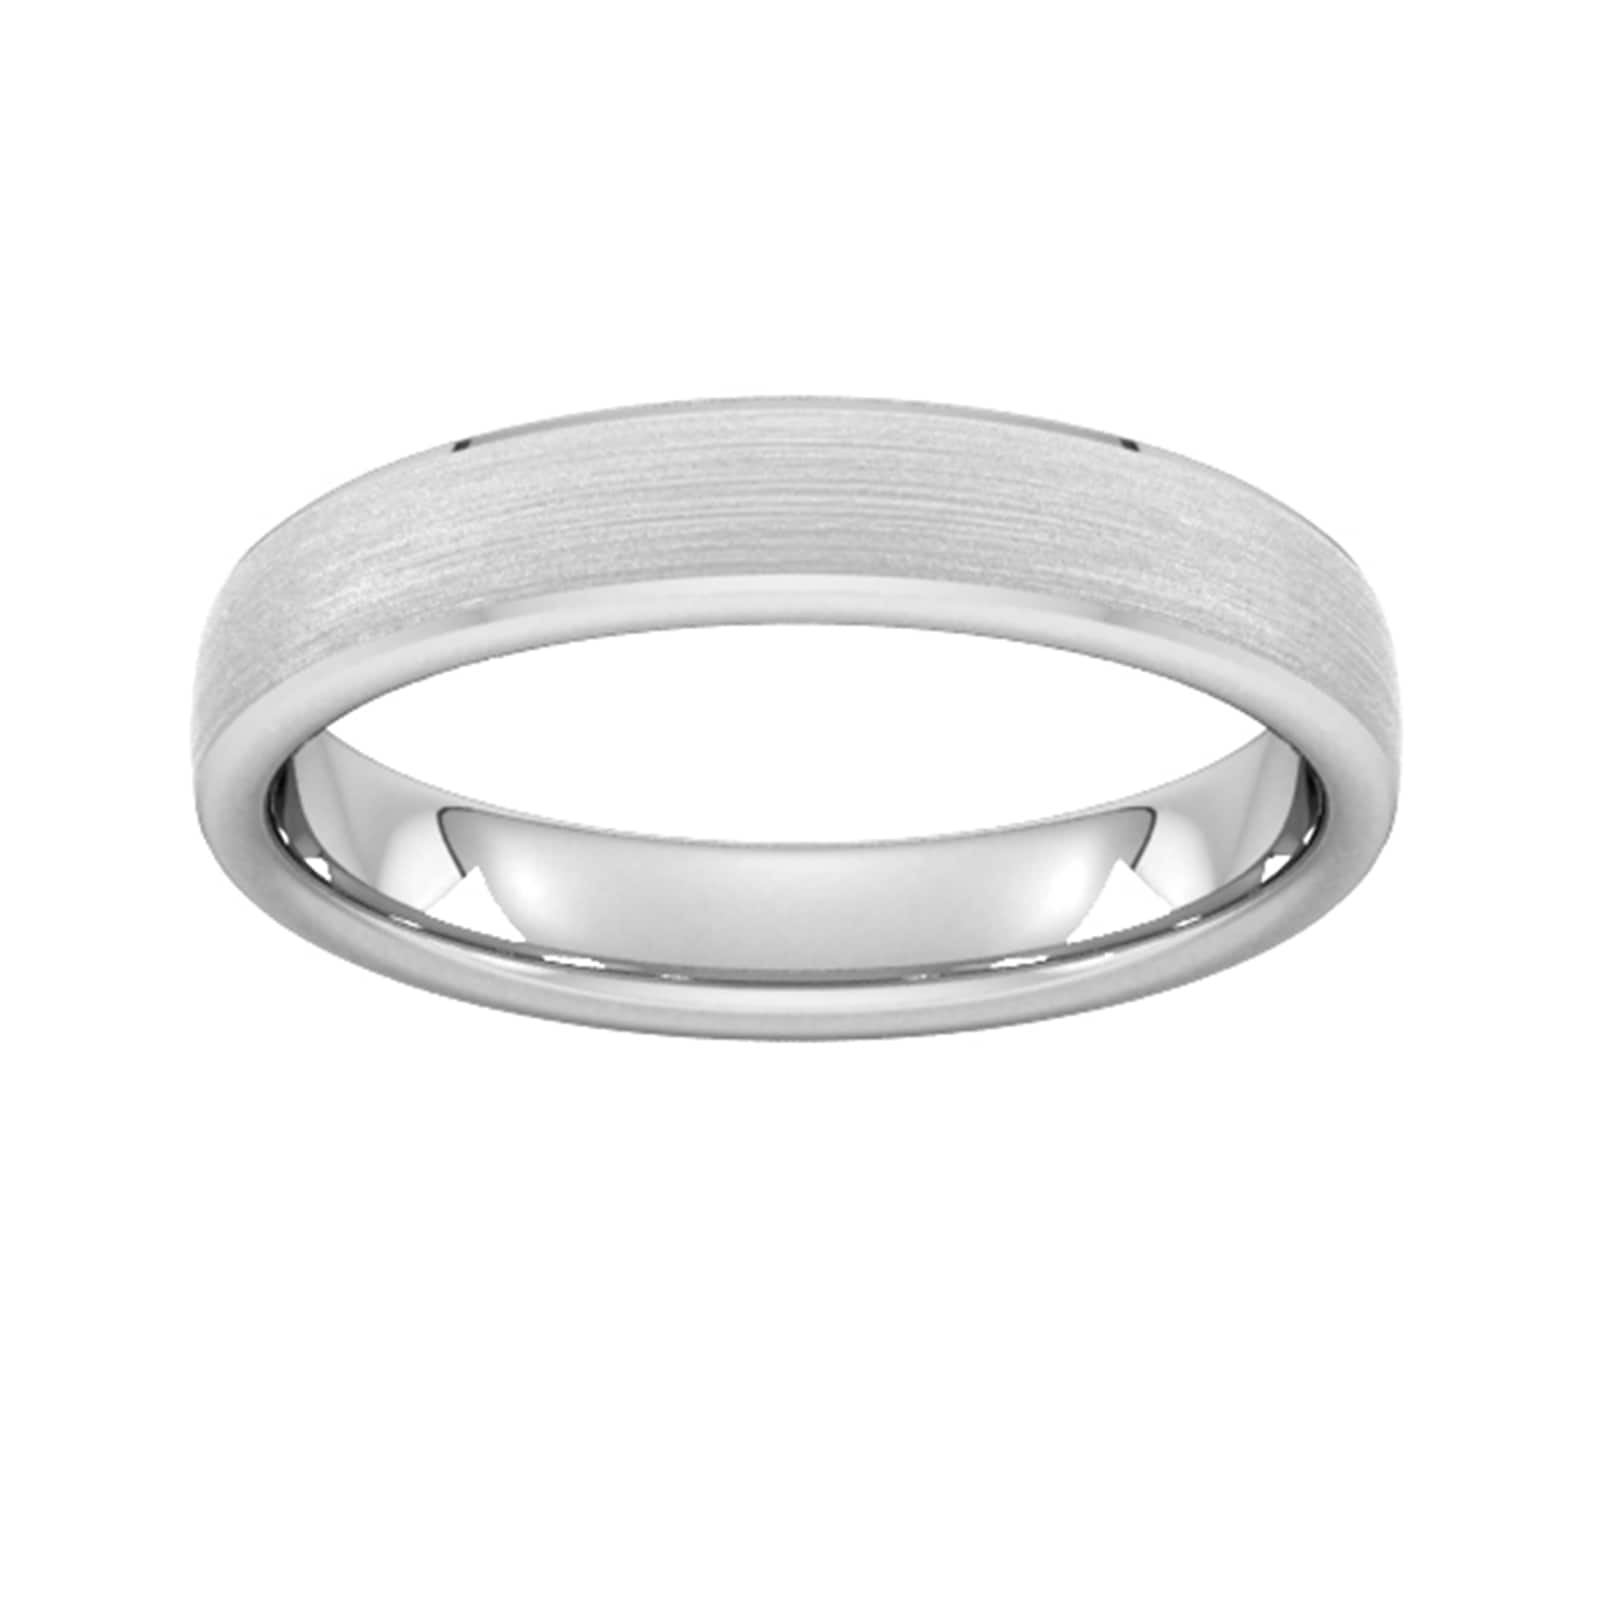 4mm D Shape Standard Polished Chamfered Edges With Matt Centre Wedding Ring In 18 Carat White Gold - Ring Size O